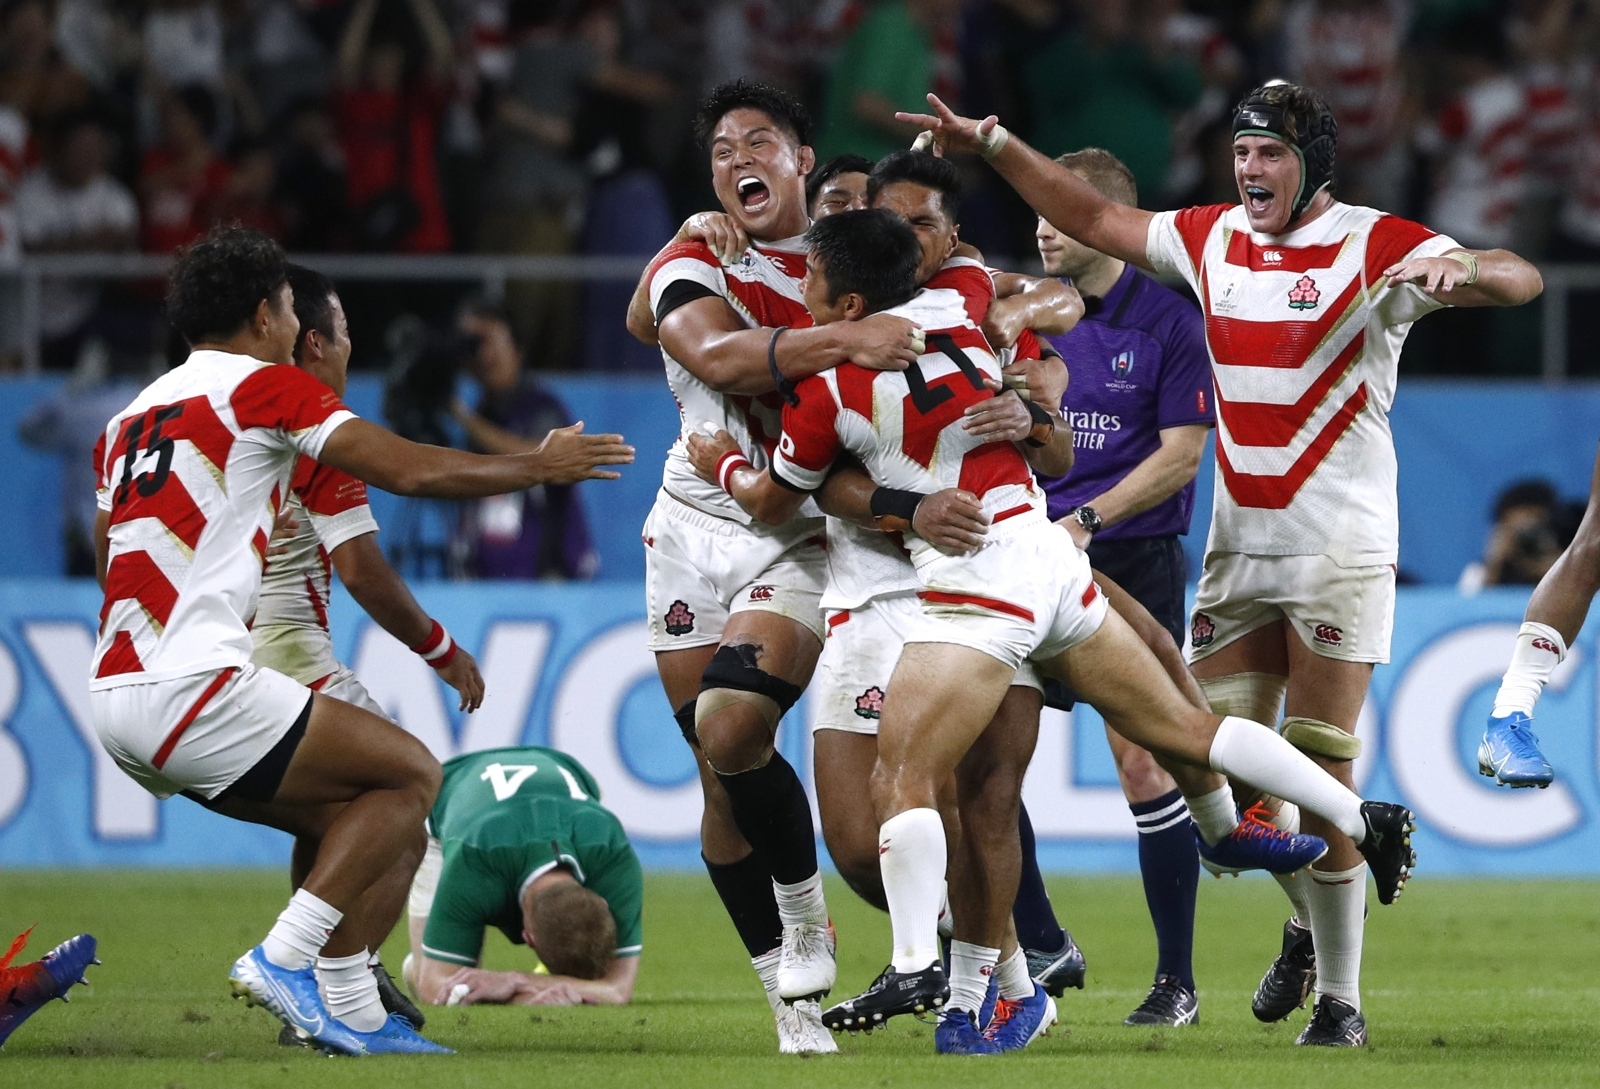 Rugby World Cup 2019 - Pool A - Japan v Ireland Rugby Union - Rugby World Cup 2019 - Pool A - Japan v Ireland - Shizuoka Stadium Ecopa, Shizuoka, Japan - September 28, 2019 Japan players celebrate after the match REUTERS/Edgar Su EDGAR SU